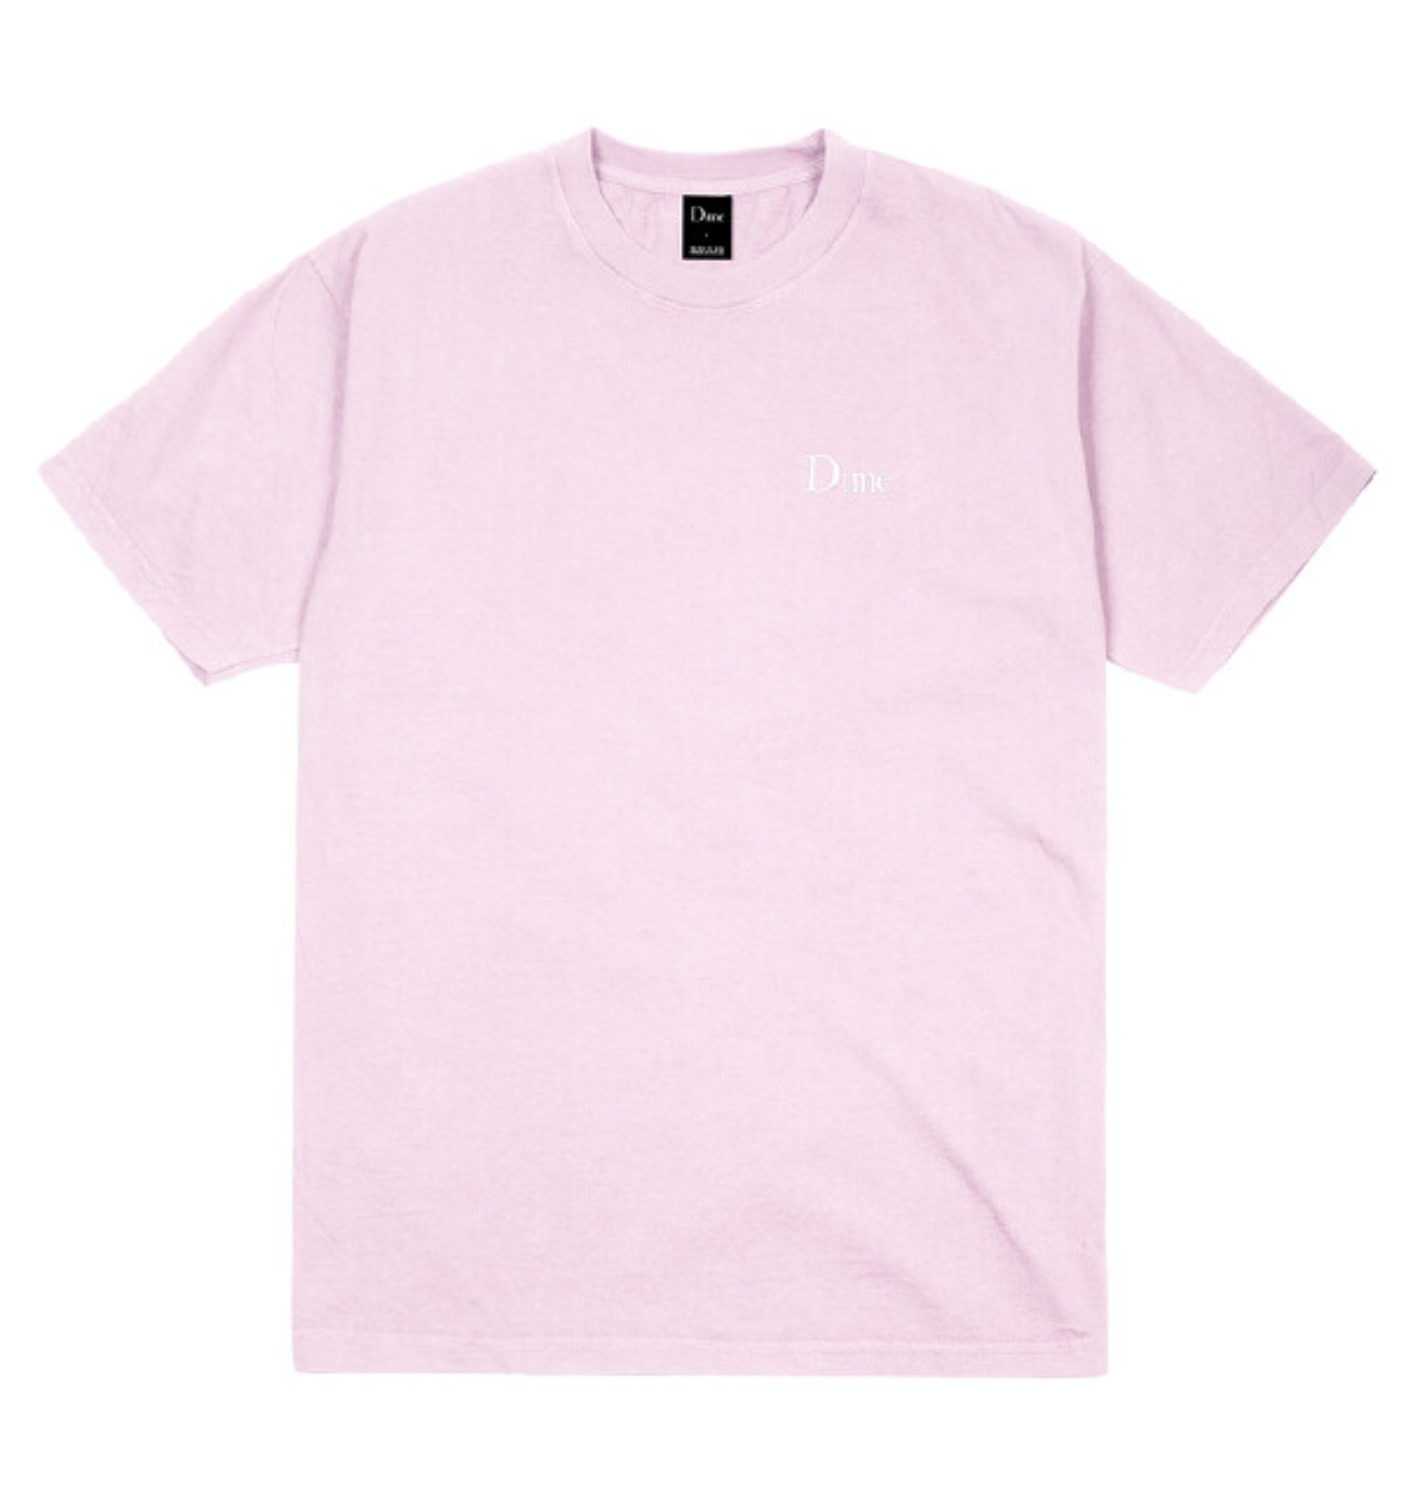 CLASSIC LOGO EMBROIDERED T SHIRT PINK